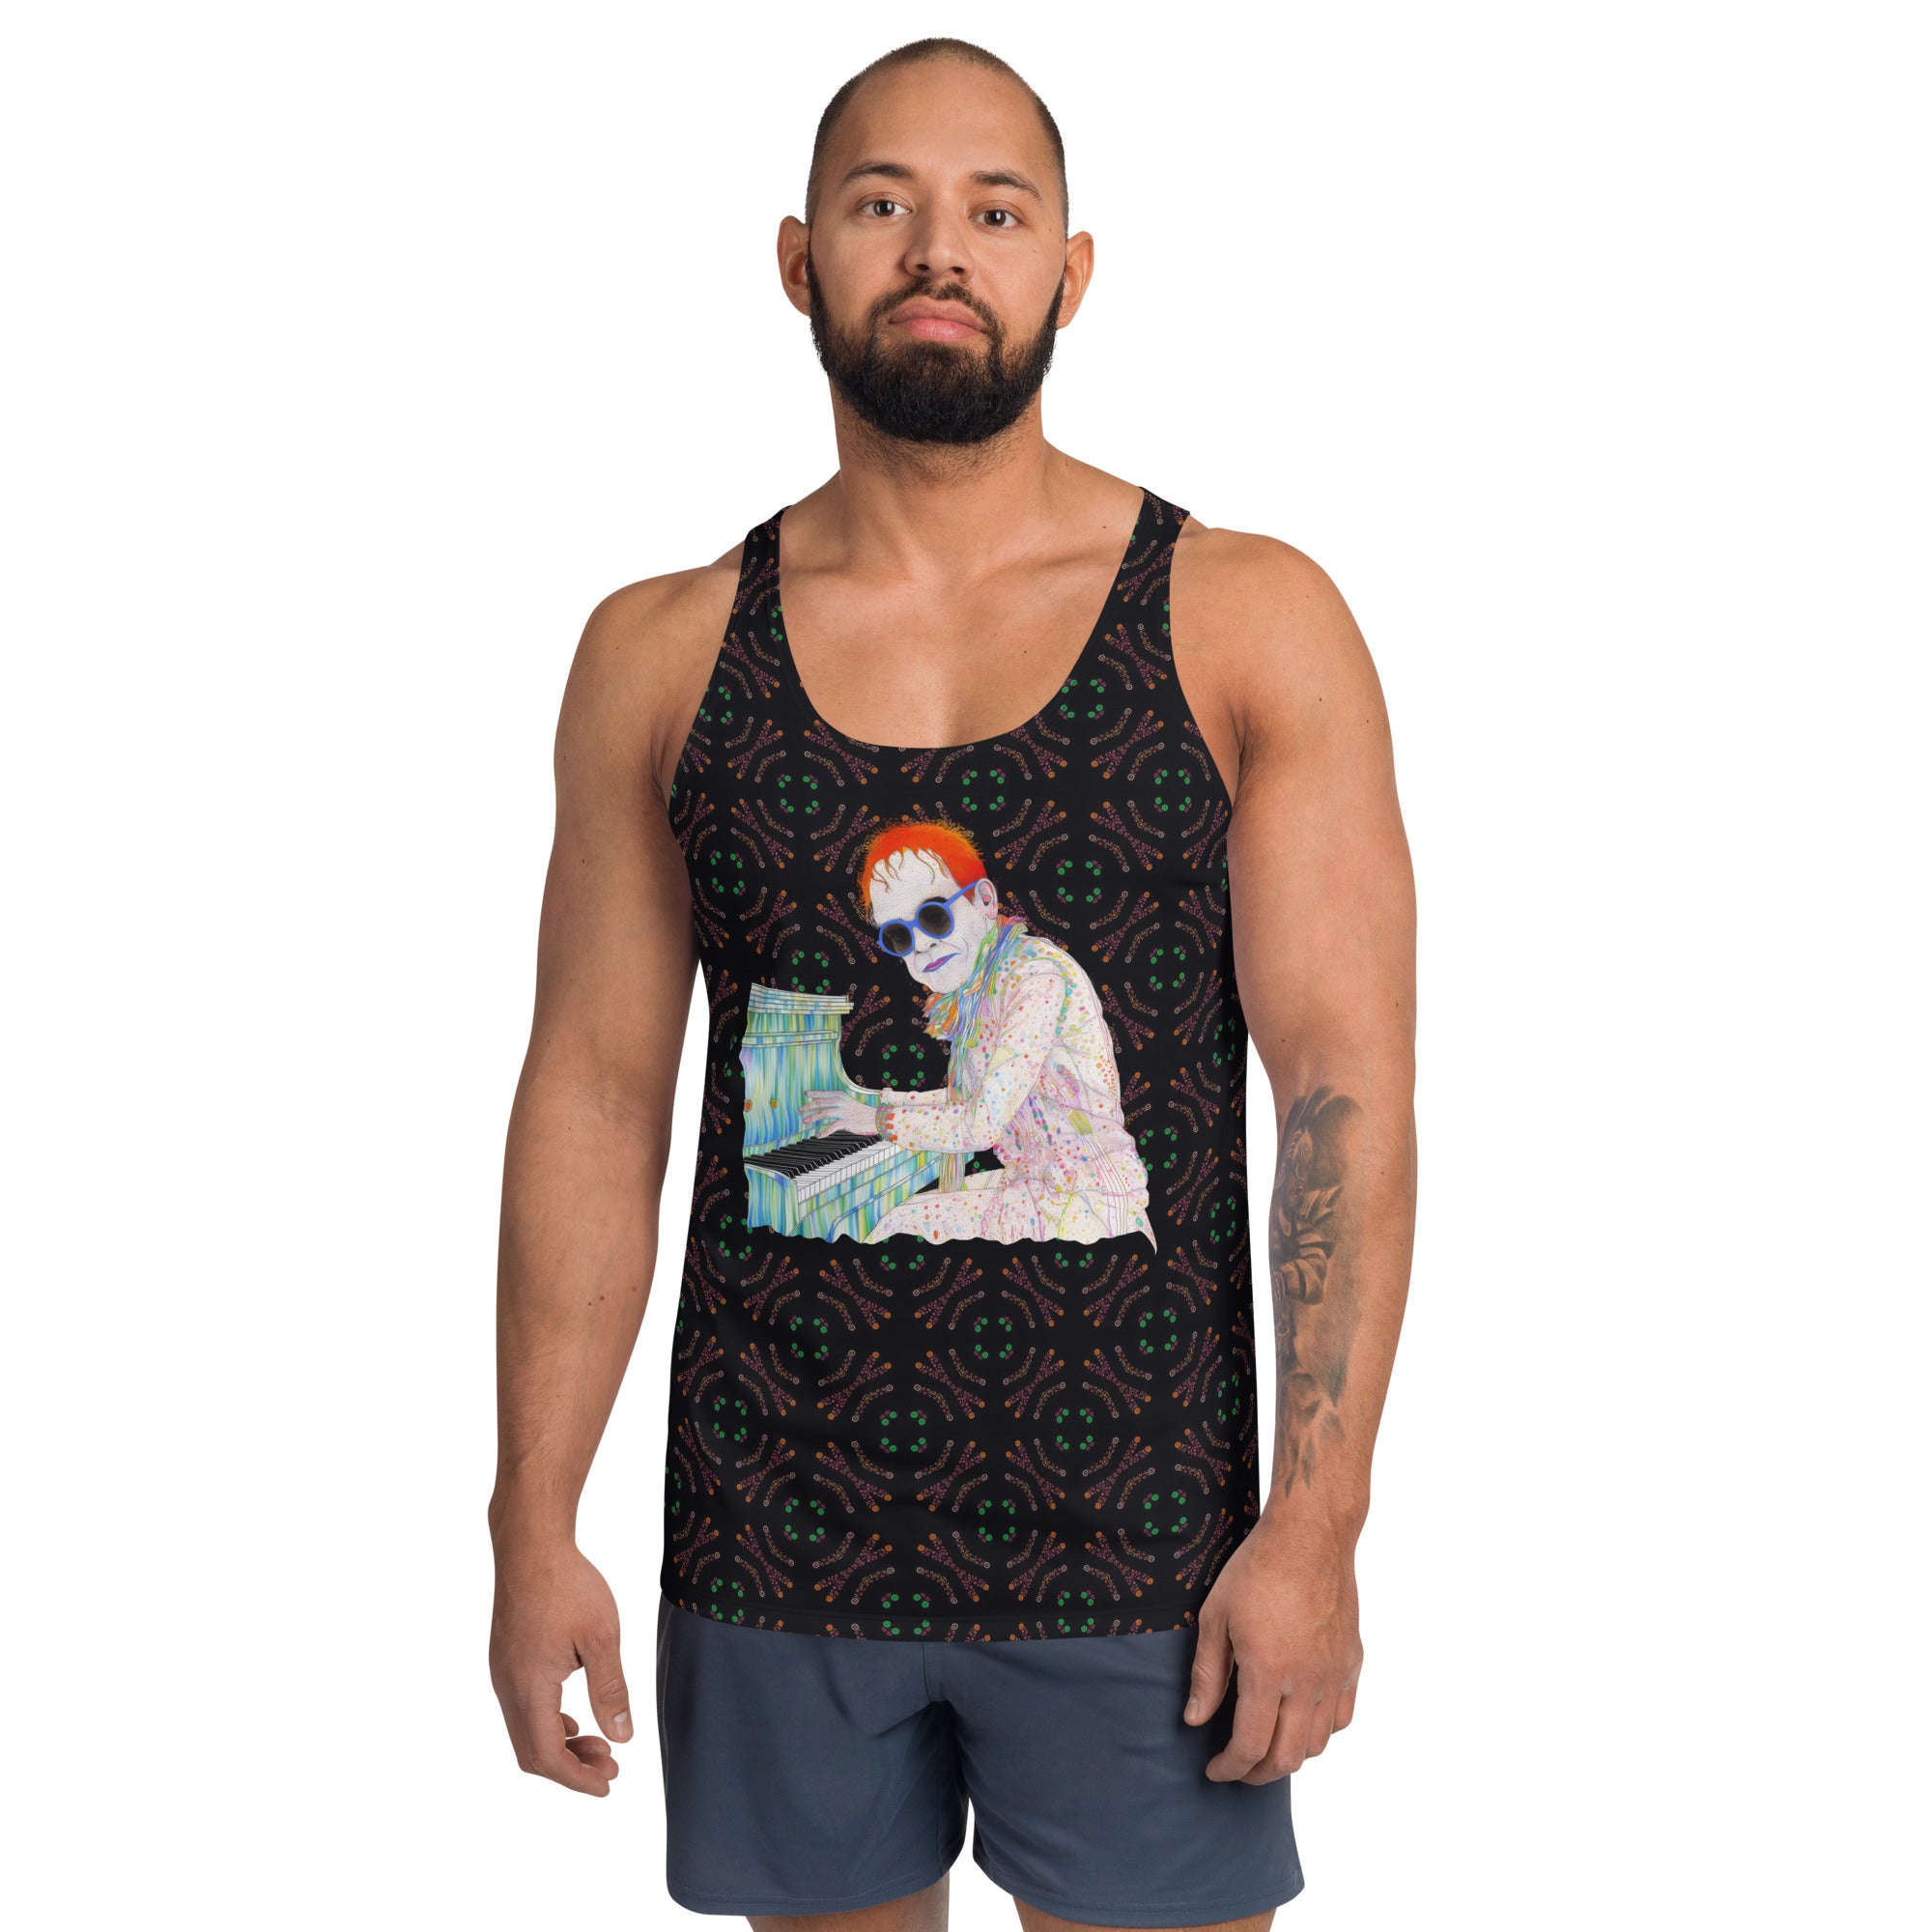 Warhol Visions men's tank top front view with pop art design.